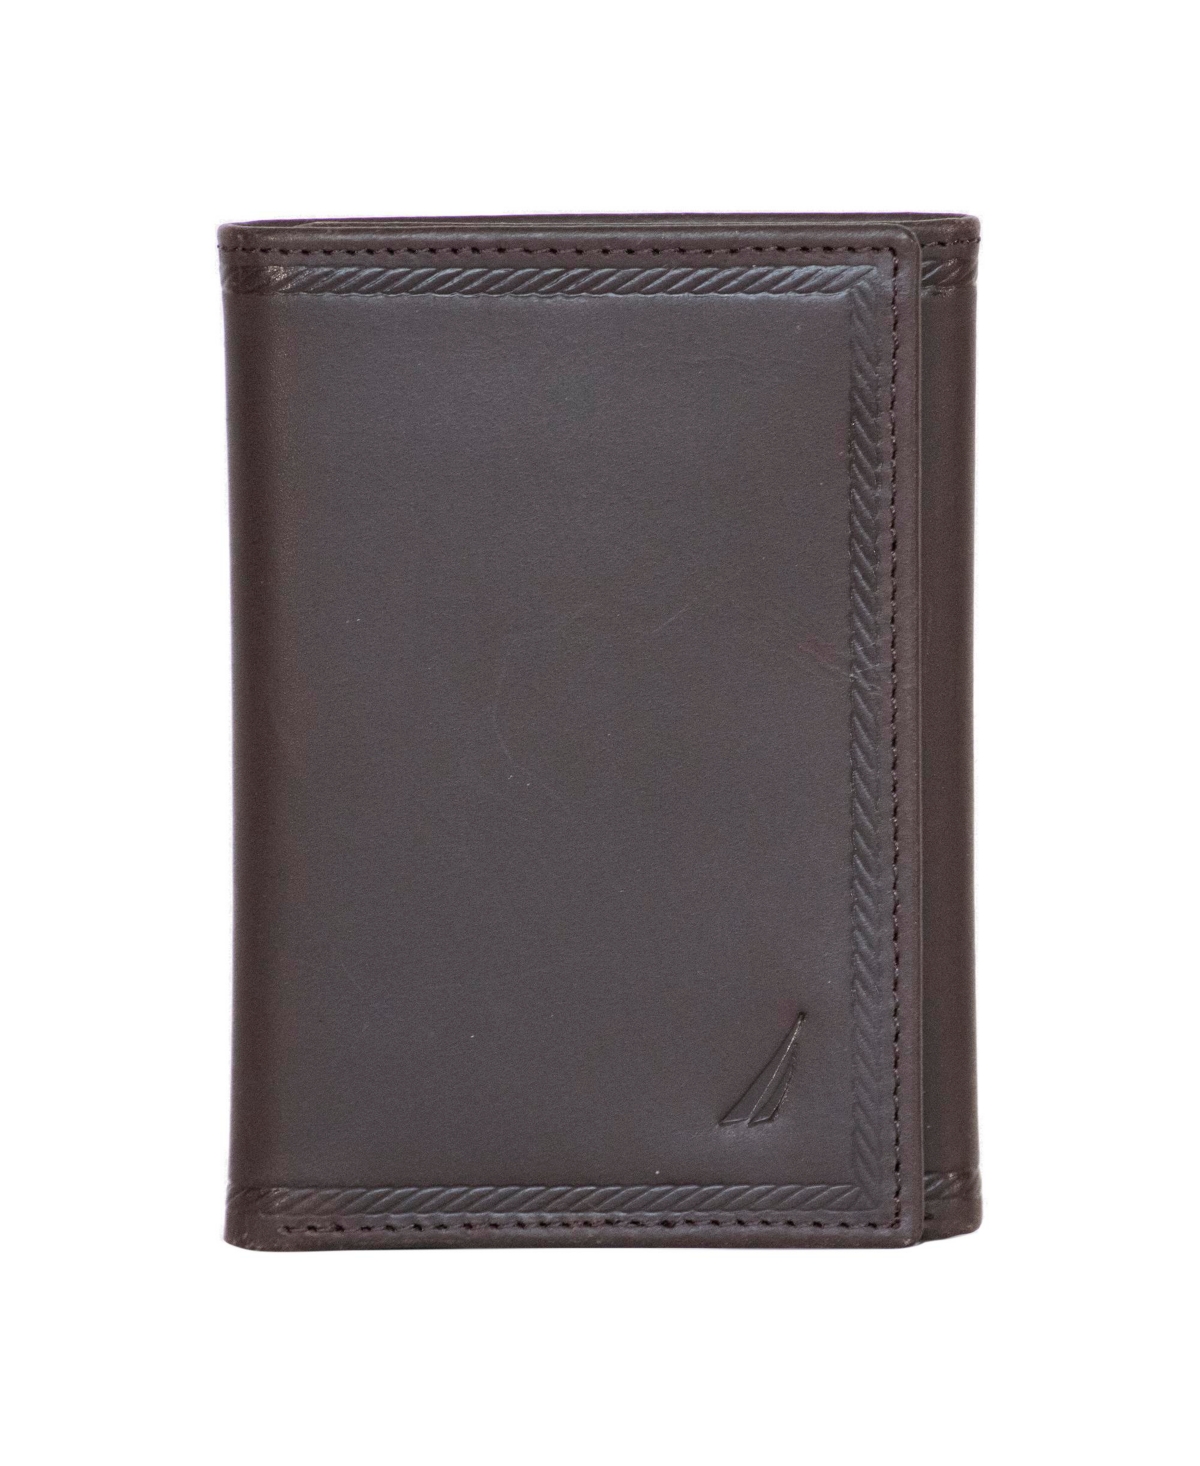 Nautica Men's Trifold Leather Wallet In Brown